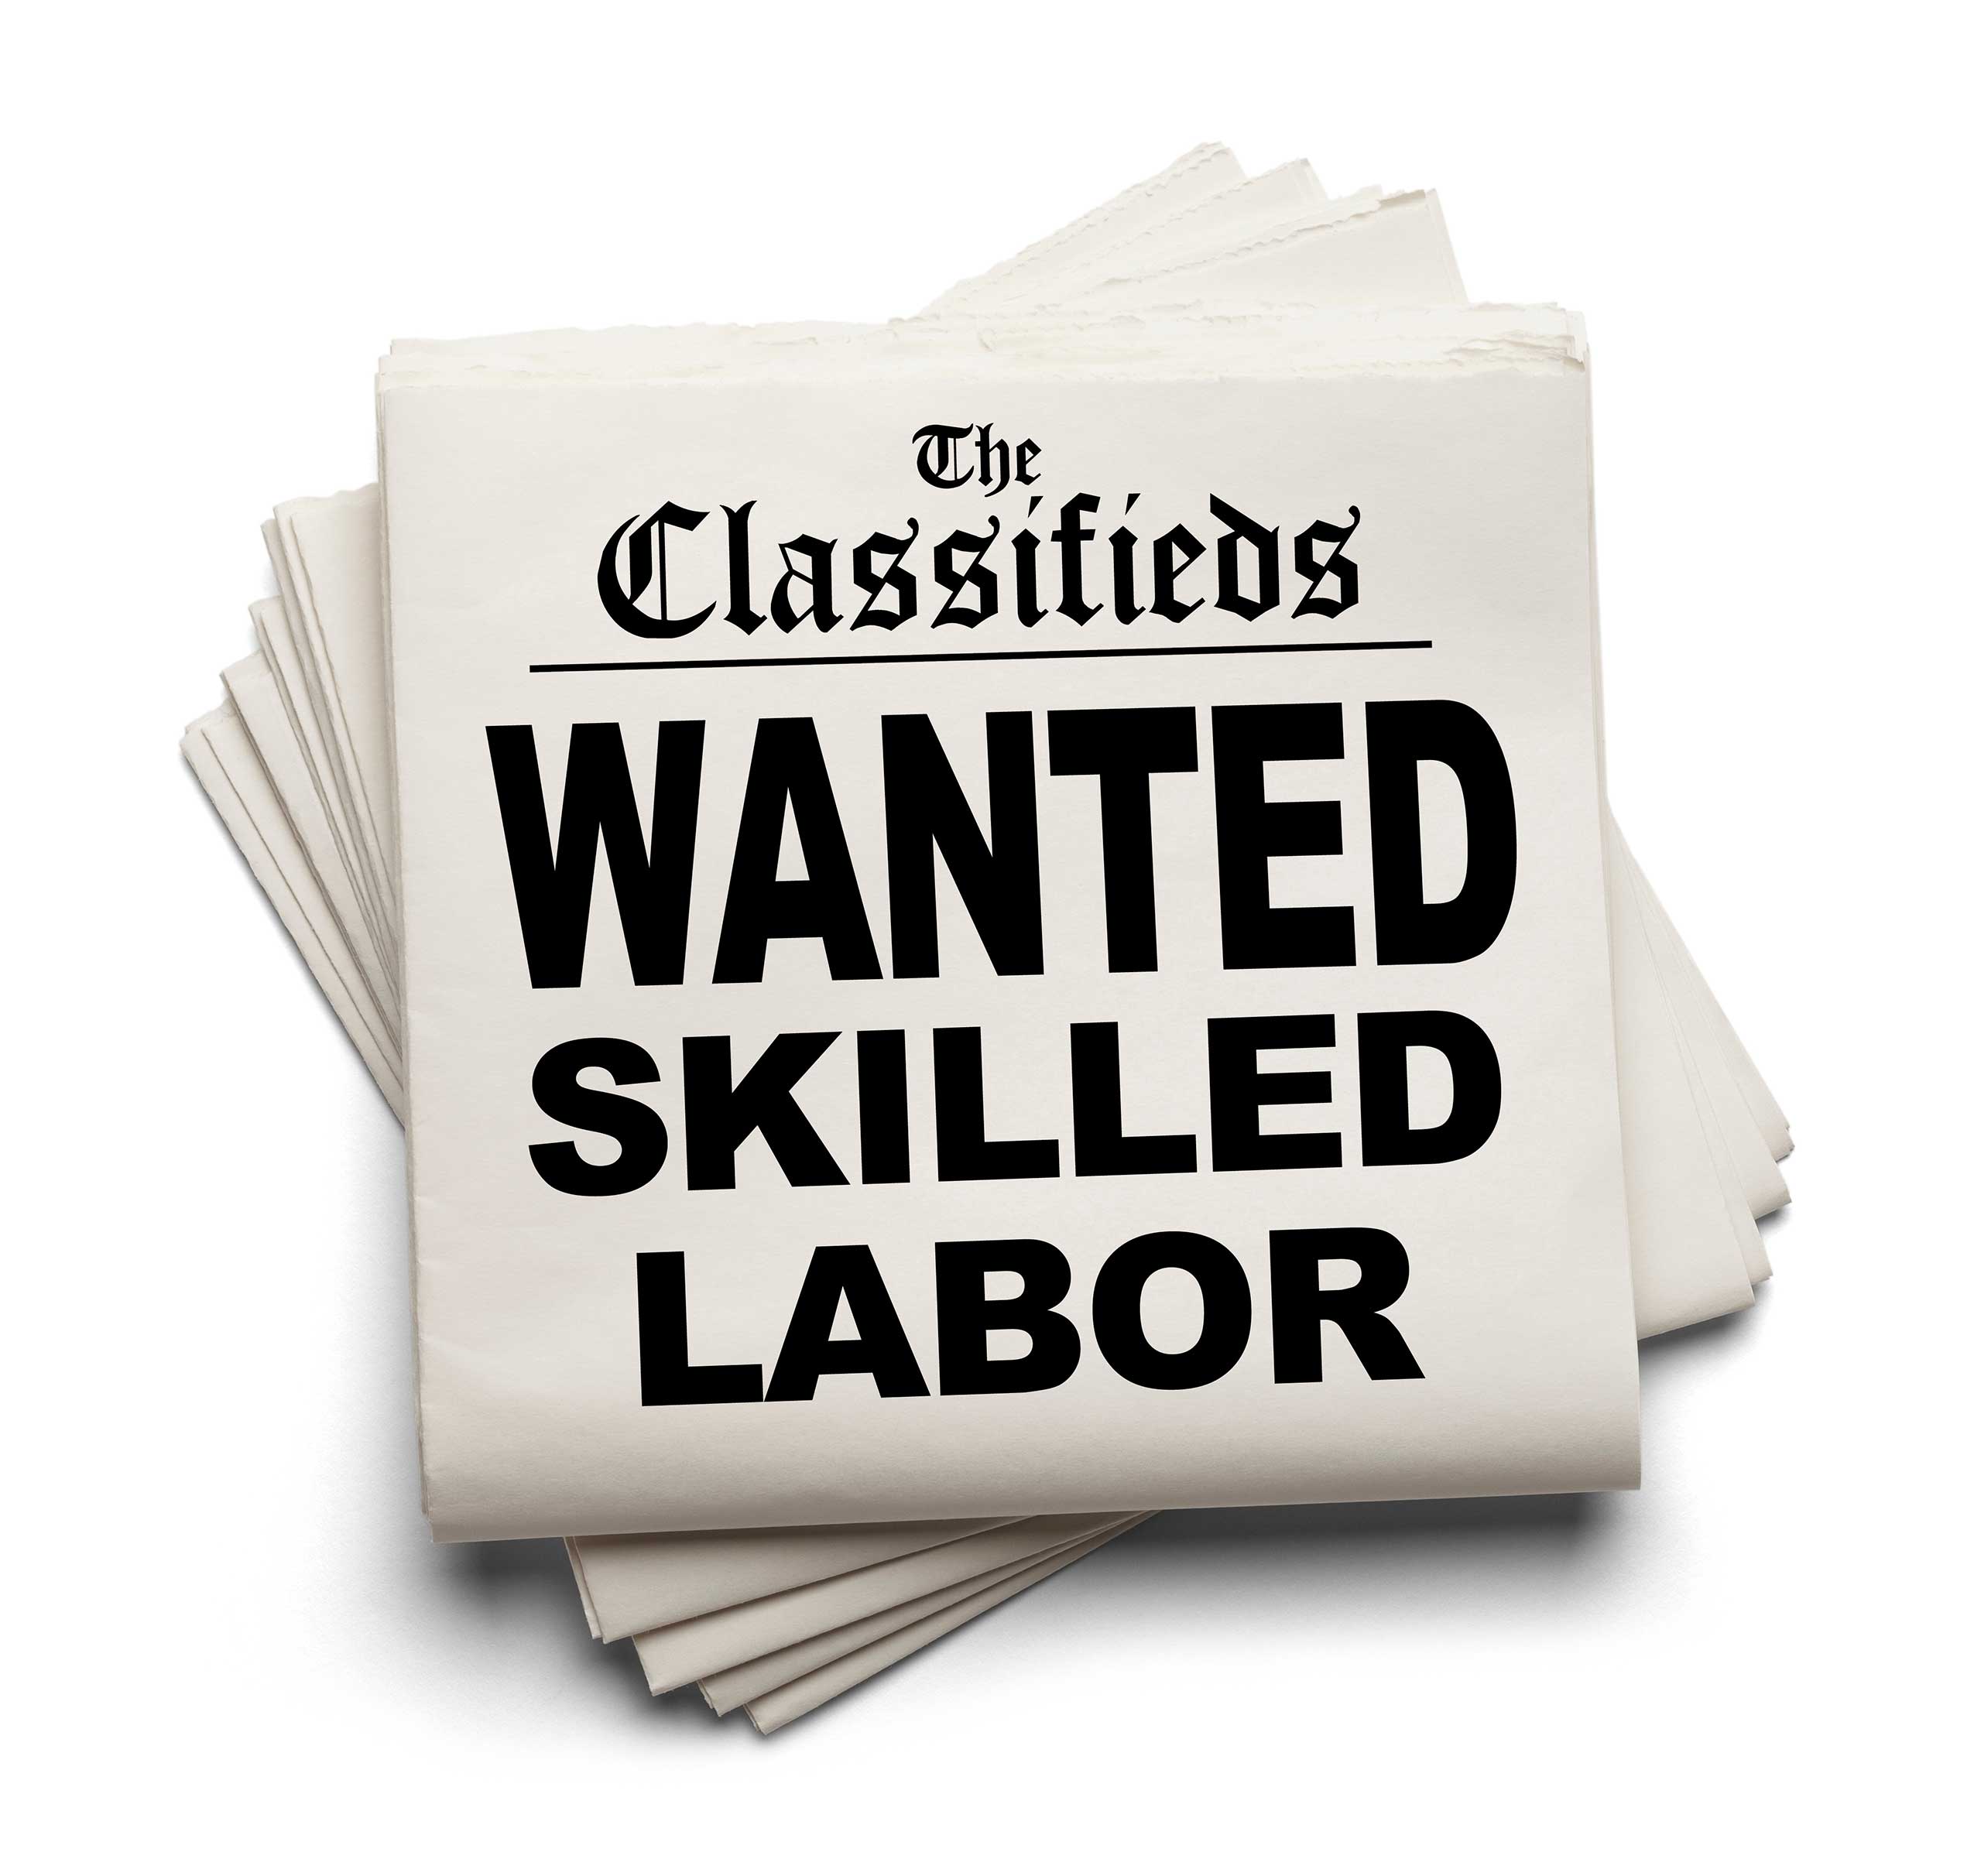 Wanted Skilled Labor Newspaper